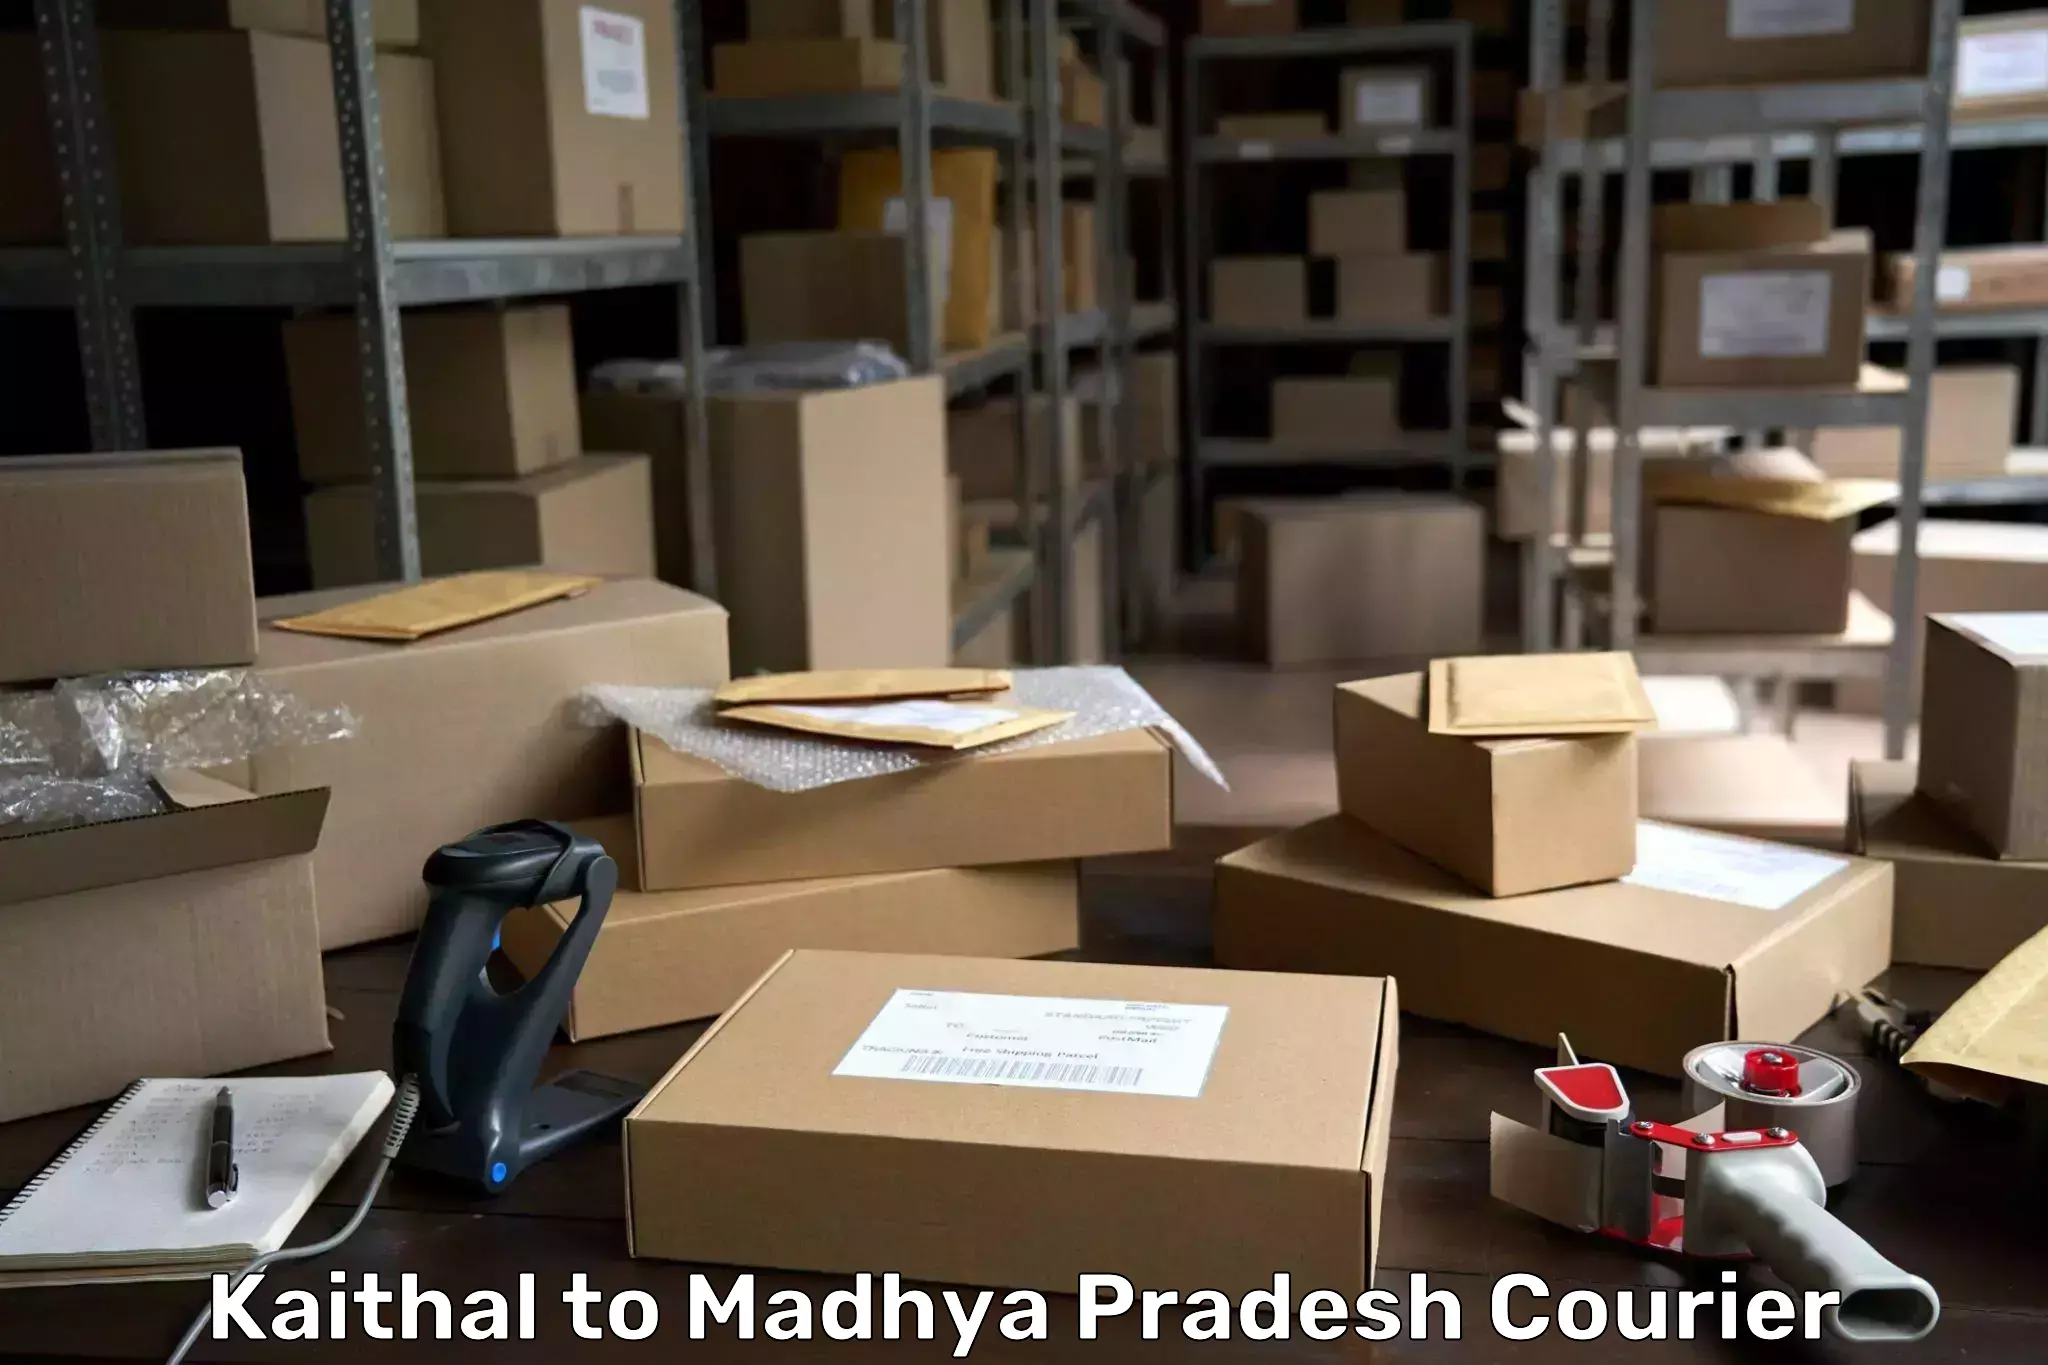 State-of-the-art courier technology Kaithal to Madhya Pradesh